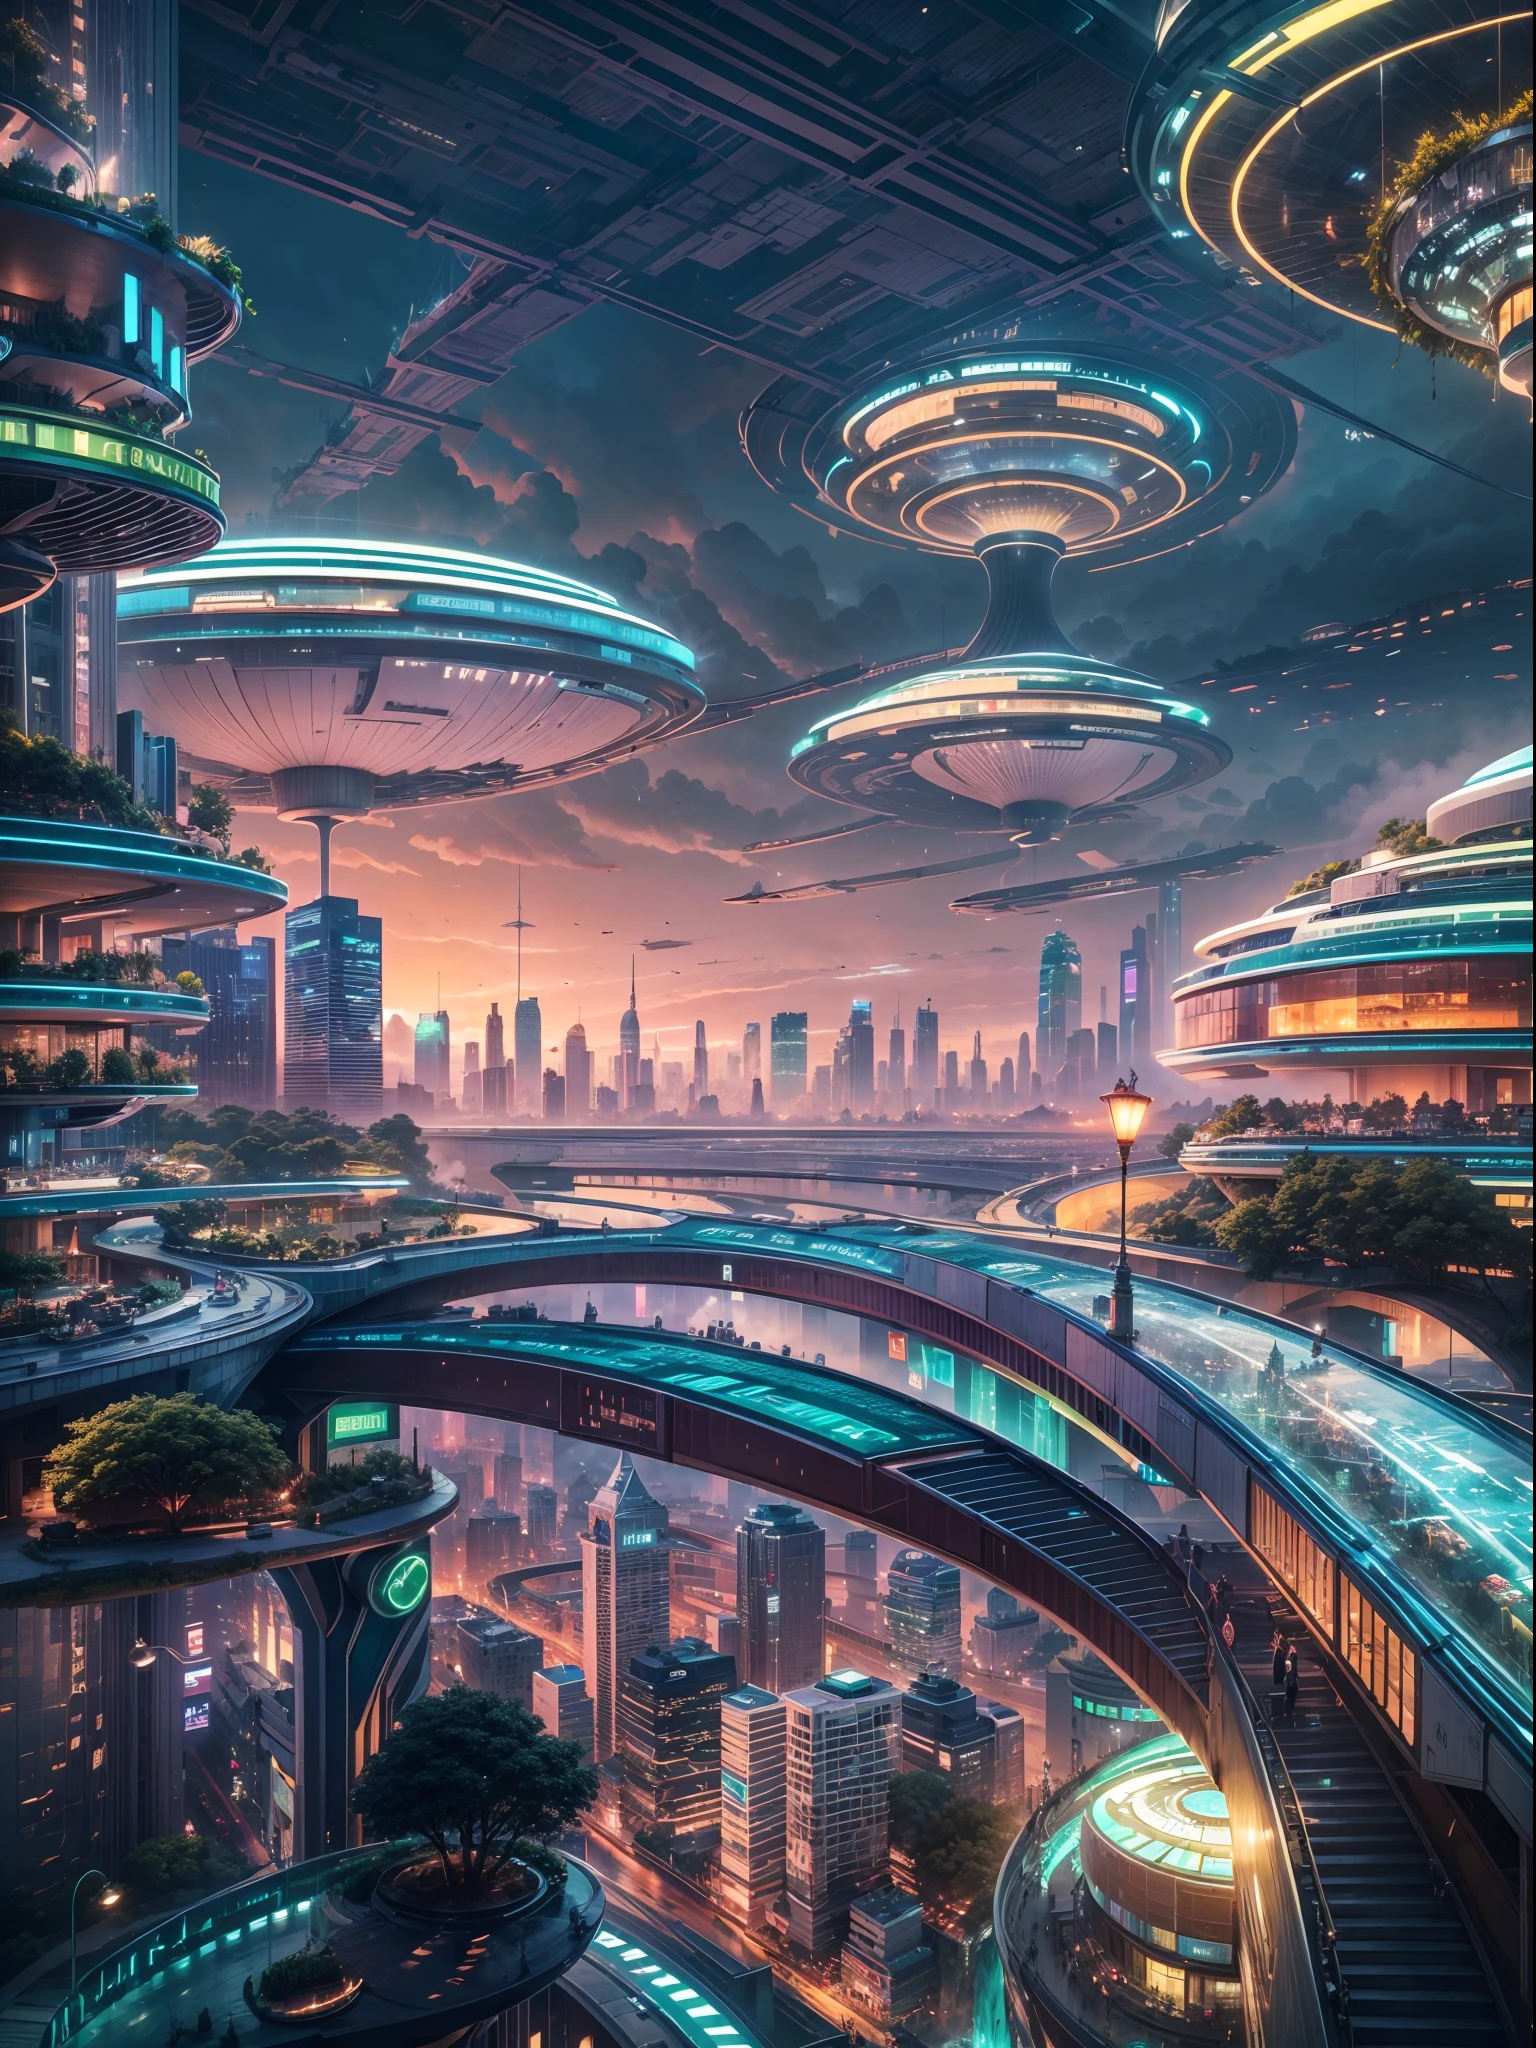 (best quality,4k,8k,highres,masterpiece:1.2),ultra-detailed,(realistic,photorealistic,photo-realistic:1.37),futuristic floating city,futuristic technology,city on a gigantic high-tech flat platform,airship,floating in the sky,futuristic city,small airship around,high-tech half-sphere platform,colorful lights,advanced architecture,modern buildings,skyscrapers,reaching the clouds,awe-inspiring view,urban landscape,impressive design,seamless integration with nature,dynamic and vibrant atmosphere,futuristic transport system,hovering vehicles,transparent pathways,lush greenery,hanging gardens,cascading waterfalls,magnificent skyline,reflection on the water,sparkling river,architectural innovation,futuristic skyscrapers,transparent domes,unusual shaped buildings,elevated walkways,impressive skyline,glowing lights,futuristic technology,minimalist design,scenic viewpoints,panoramic view,cloud-piercing towers,vibrant colors,epic sunrise,epic sunset,dazzling display of lights,magical ambiance,city of the future,urban utopia,luxurious lifestyle,innovative energy sources,sustainable development,smart city technology,advanced infrastructure,tranquil atmosphere,harmonious coexistence of nature and technology,awe-inspiring cityscape,unprecedented urban planning,seamless connection between buildings and nature,high-tech metropolis,cutting-edge engineering marvels,future of urban living,visionary architectural concepts,energy-efficient buildings,harmony with the environment,city floating above the clouds,utopian dreams turned reality,limitless possibilities,advanced transportation network,green energy integration,innovative materials,impressive holographic displays,advanced communication systems,breathtaking aerial views,peaceful and serene surroundings,modernist aesthetics,ethereal beauty